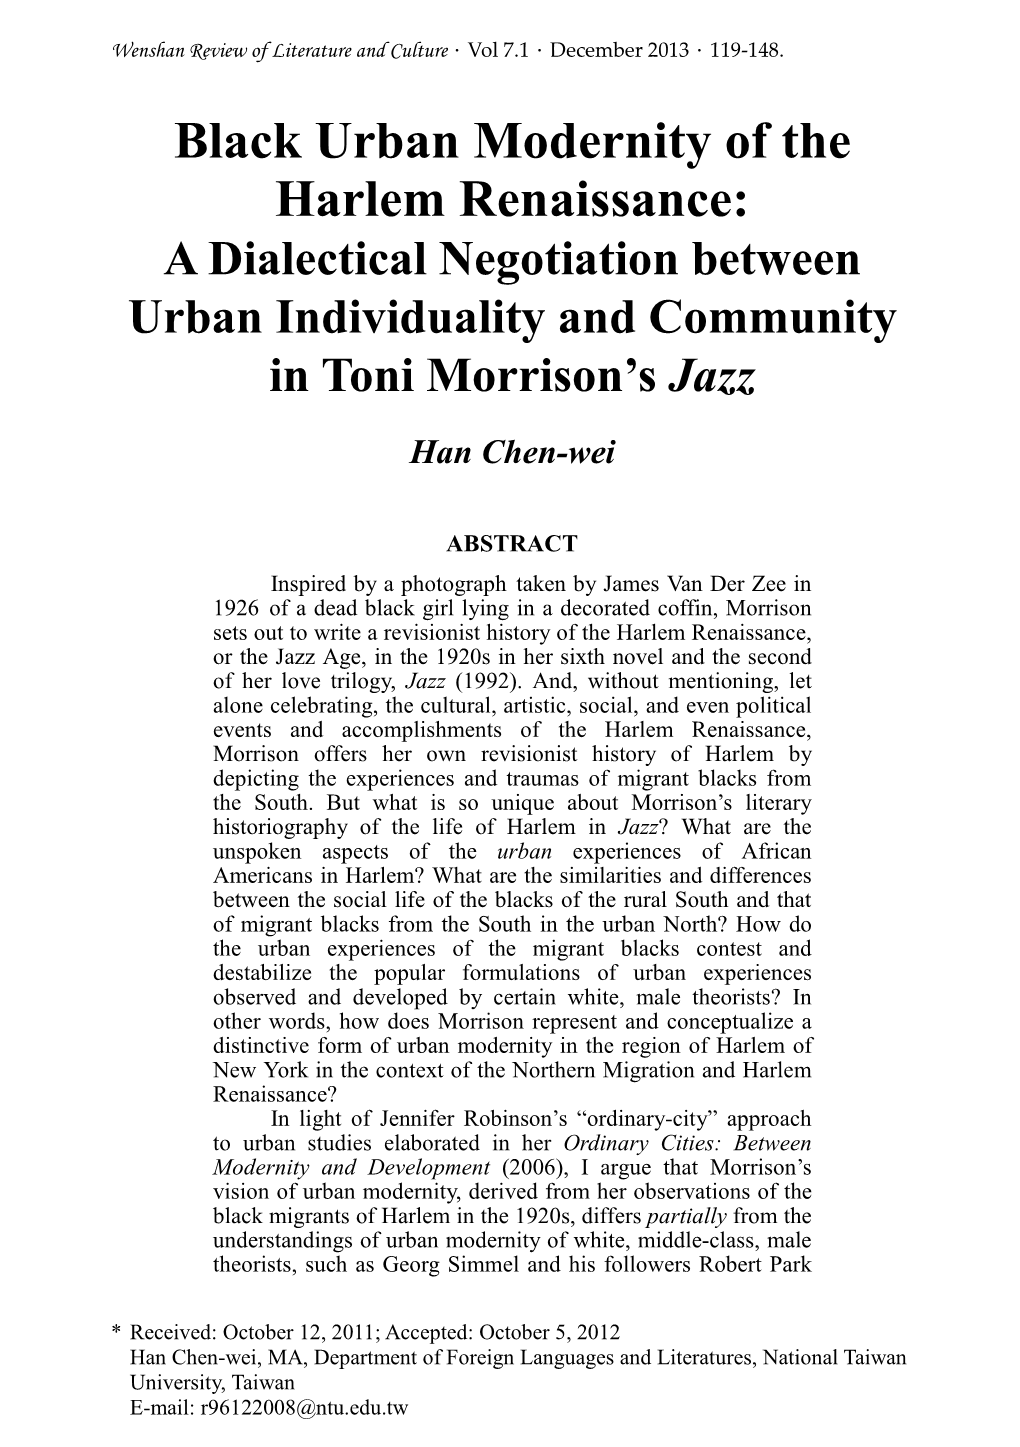 Black Urban Modernity of the Harlem Renaissance: a Dialectical Negotiation Between Urban Individuality and Community in Toni Morrison’S Jazz Han Chen-Wei